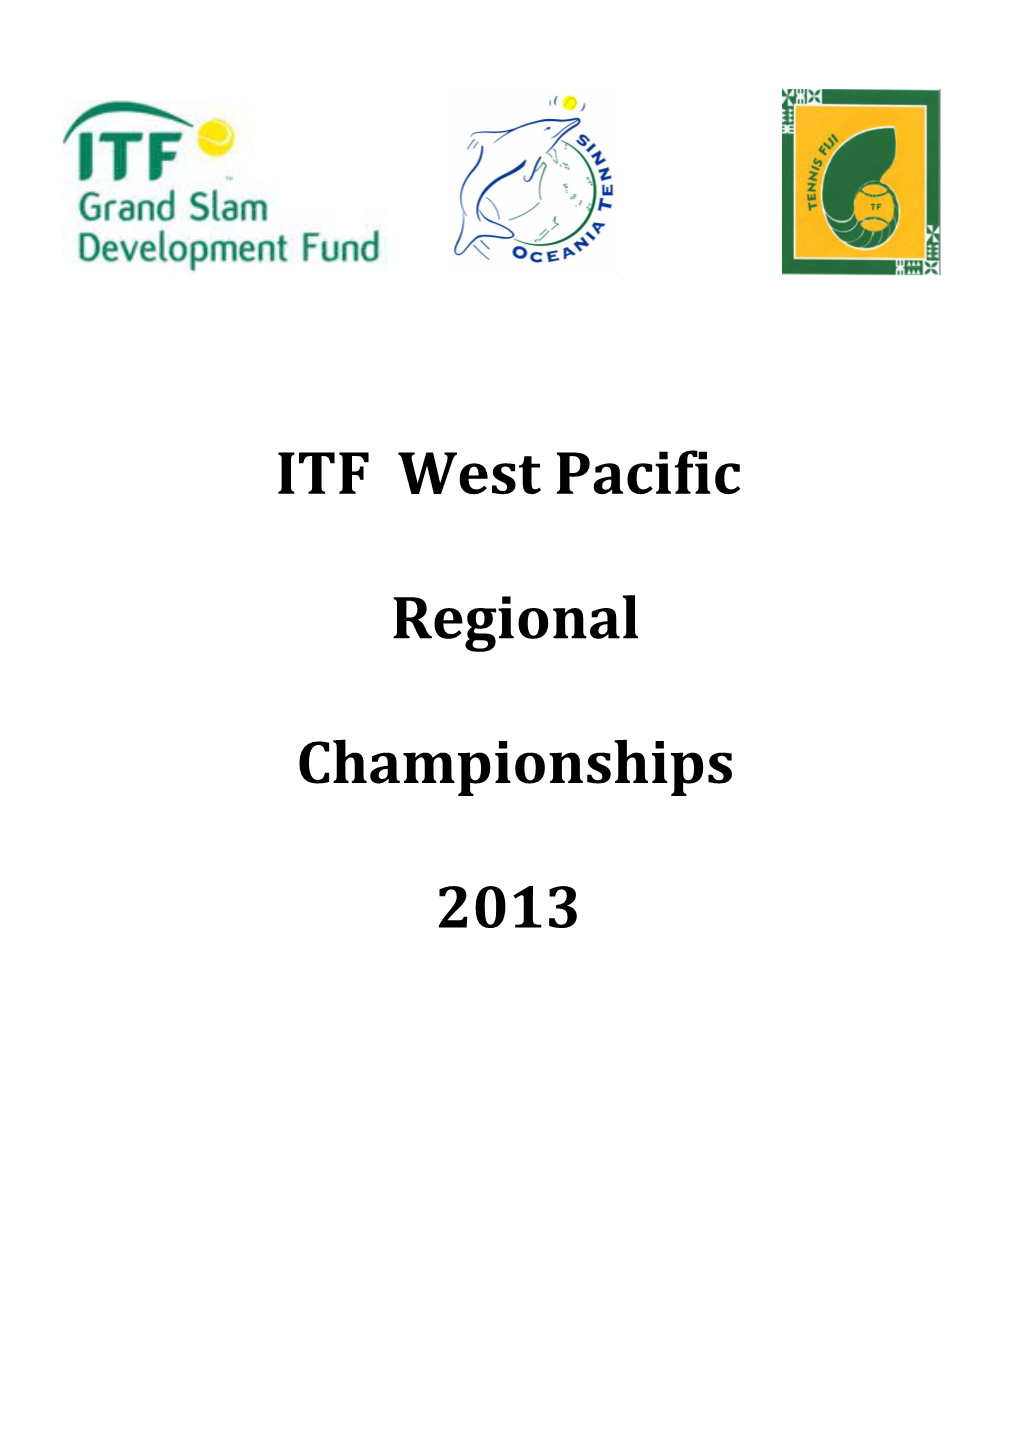 2013 ITF West Pacific Regional Championships- Fact Sheet